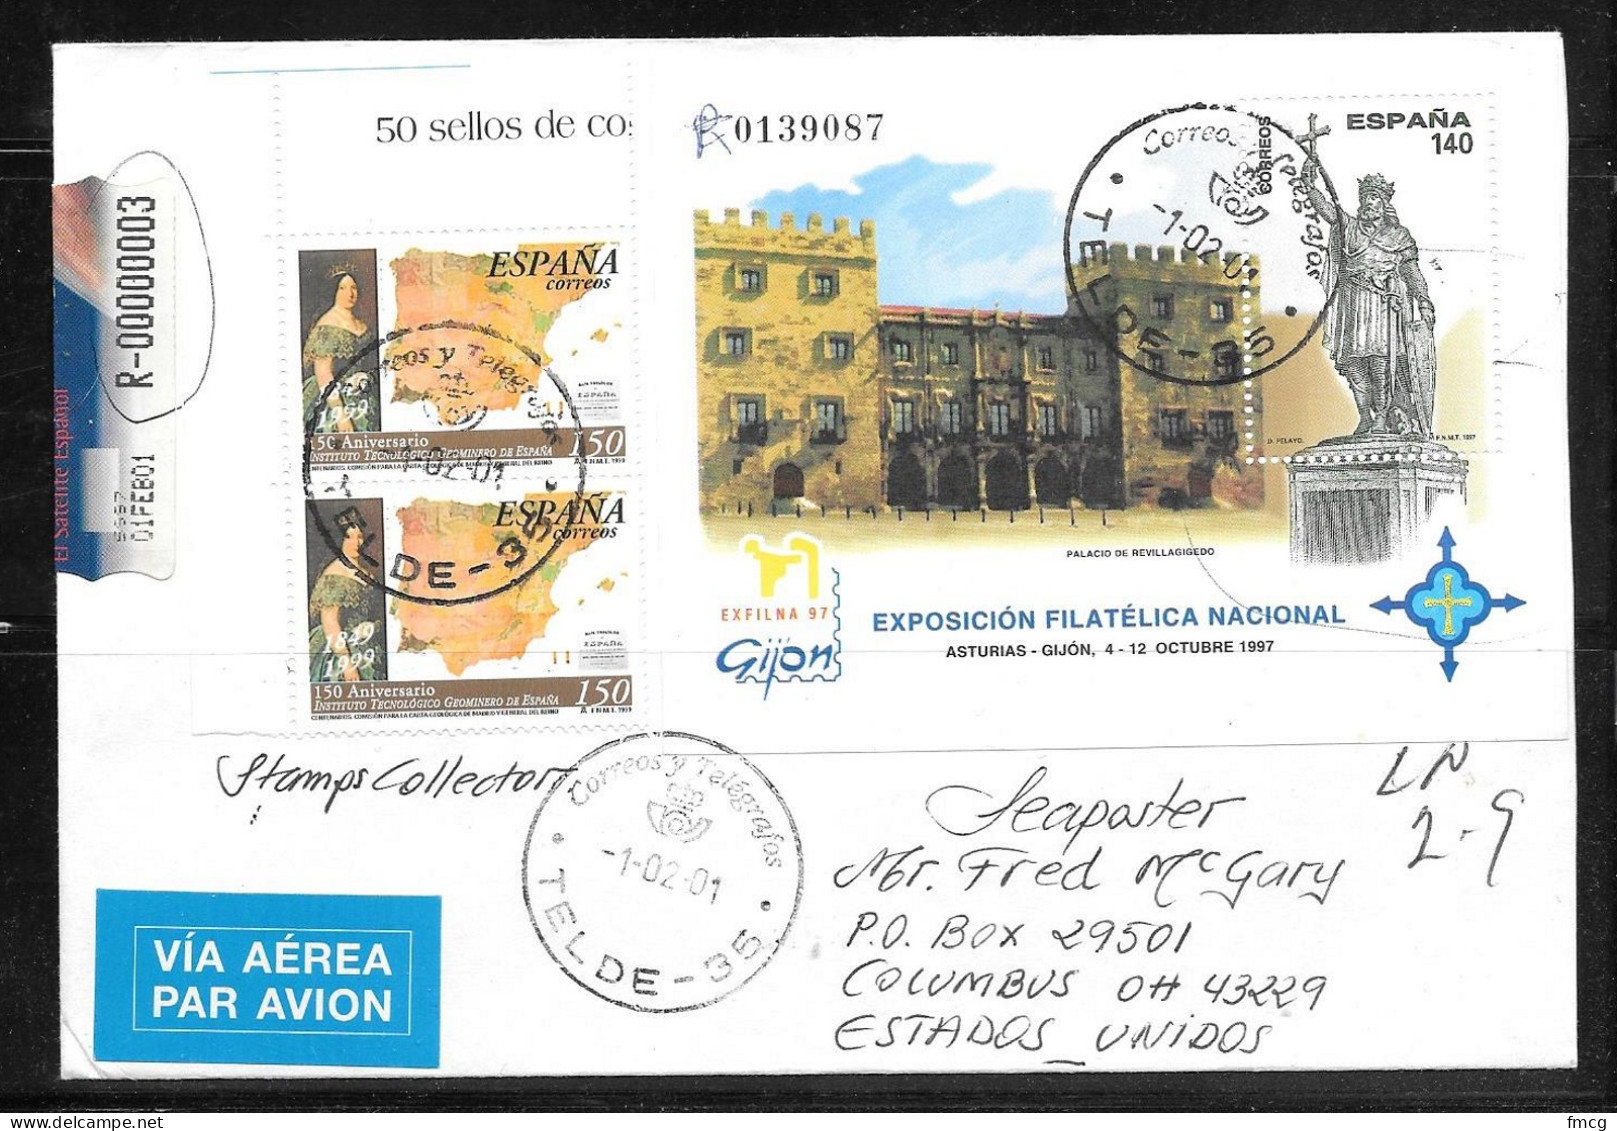 2001 Registered Las Palmas To USA With 1997 Philatelic Exhibition Sheet - Lettres & Documents